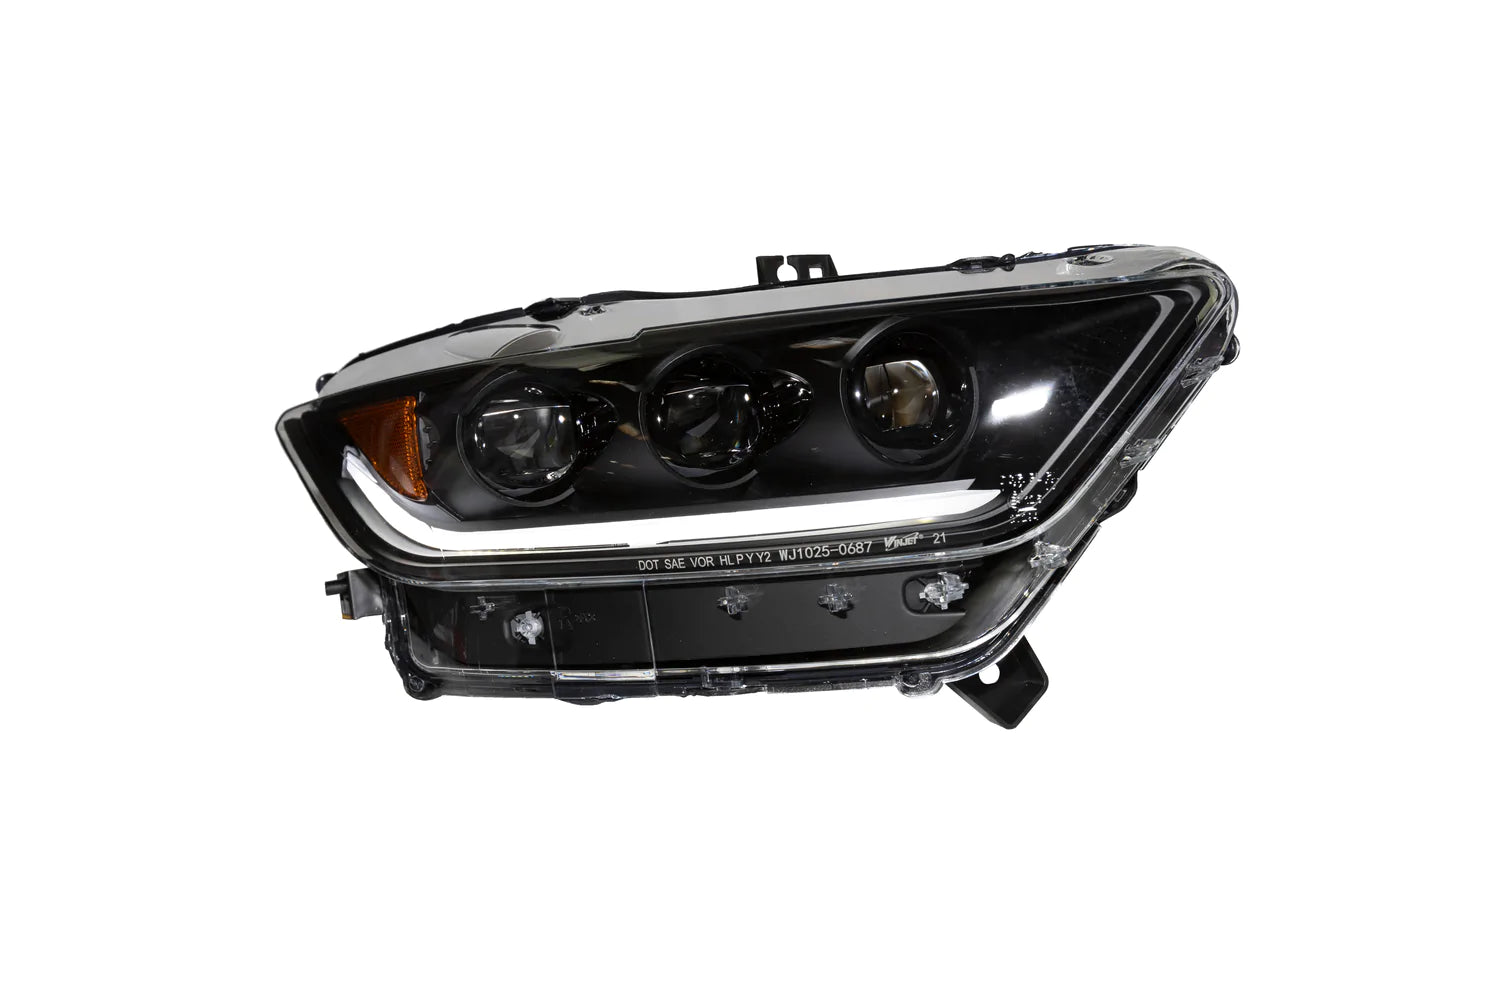 Winjet Renegade Projector Headlights Ford Mustang S550 (15-17